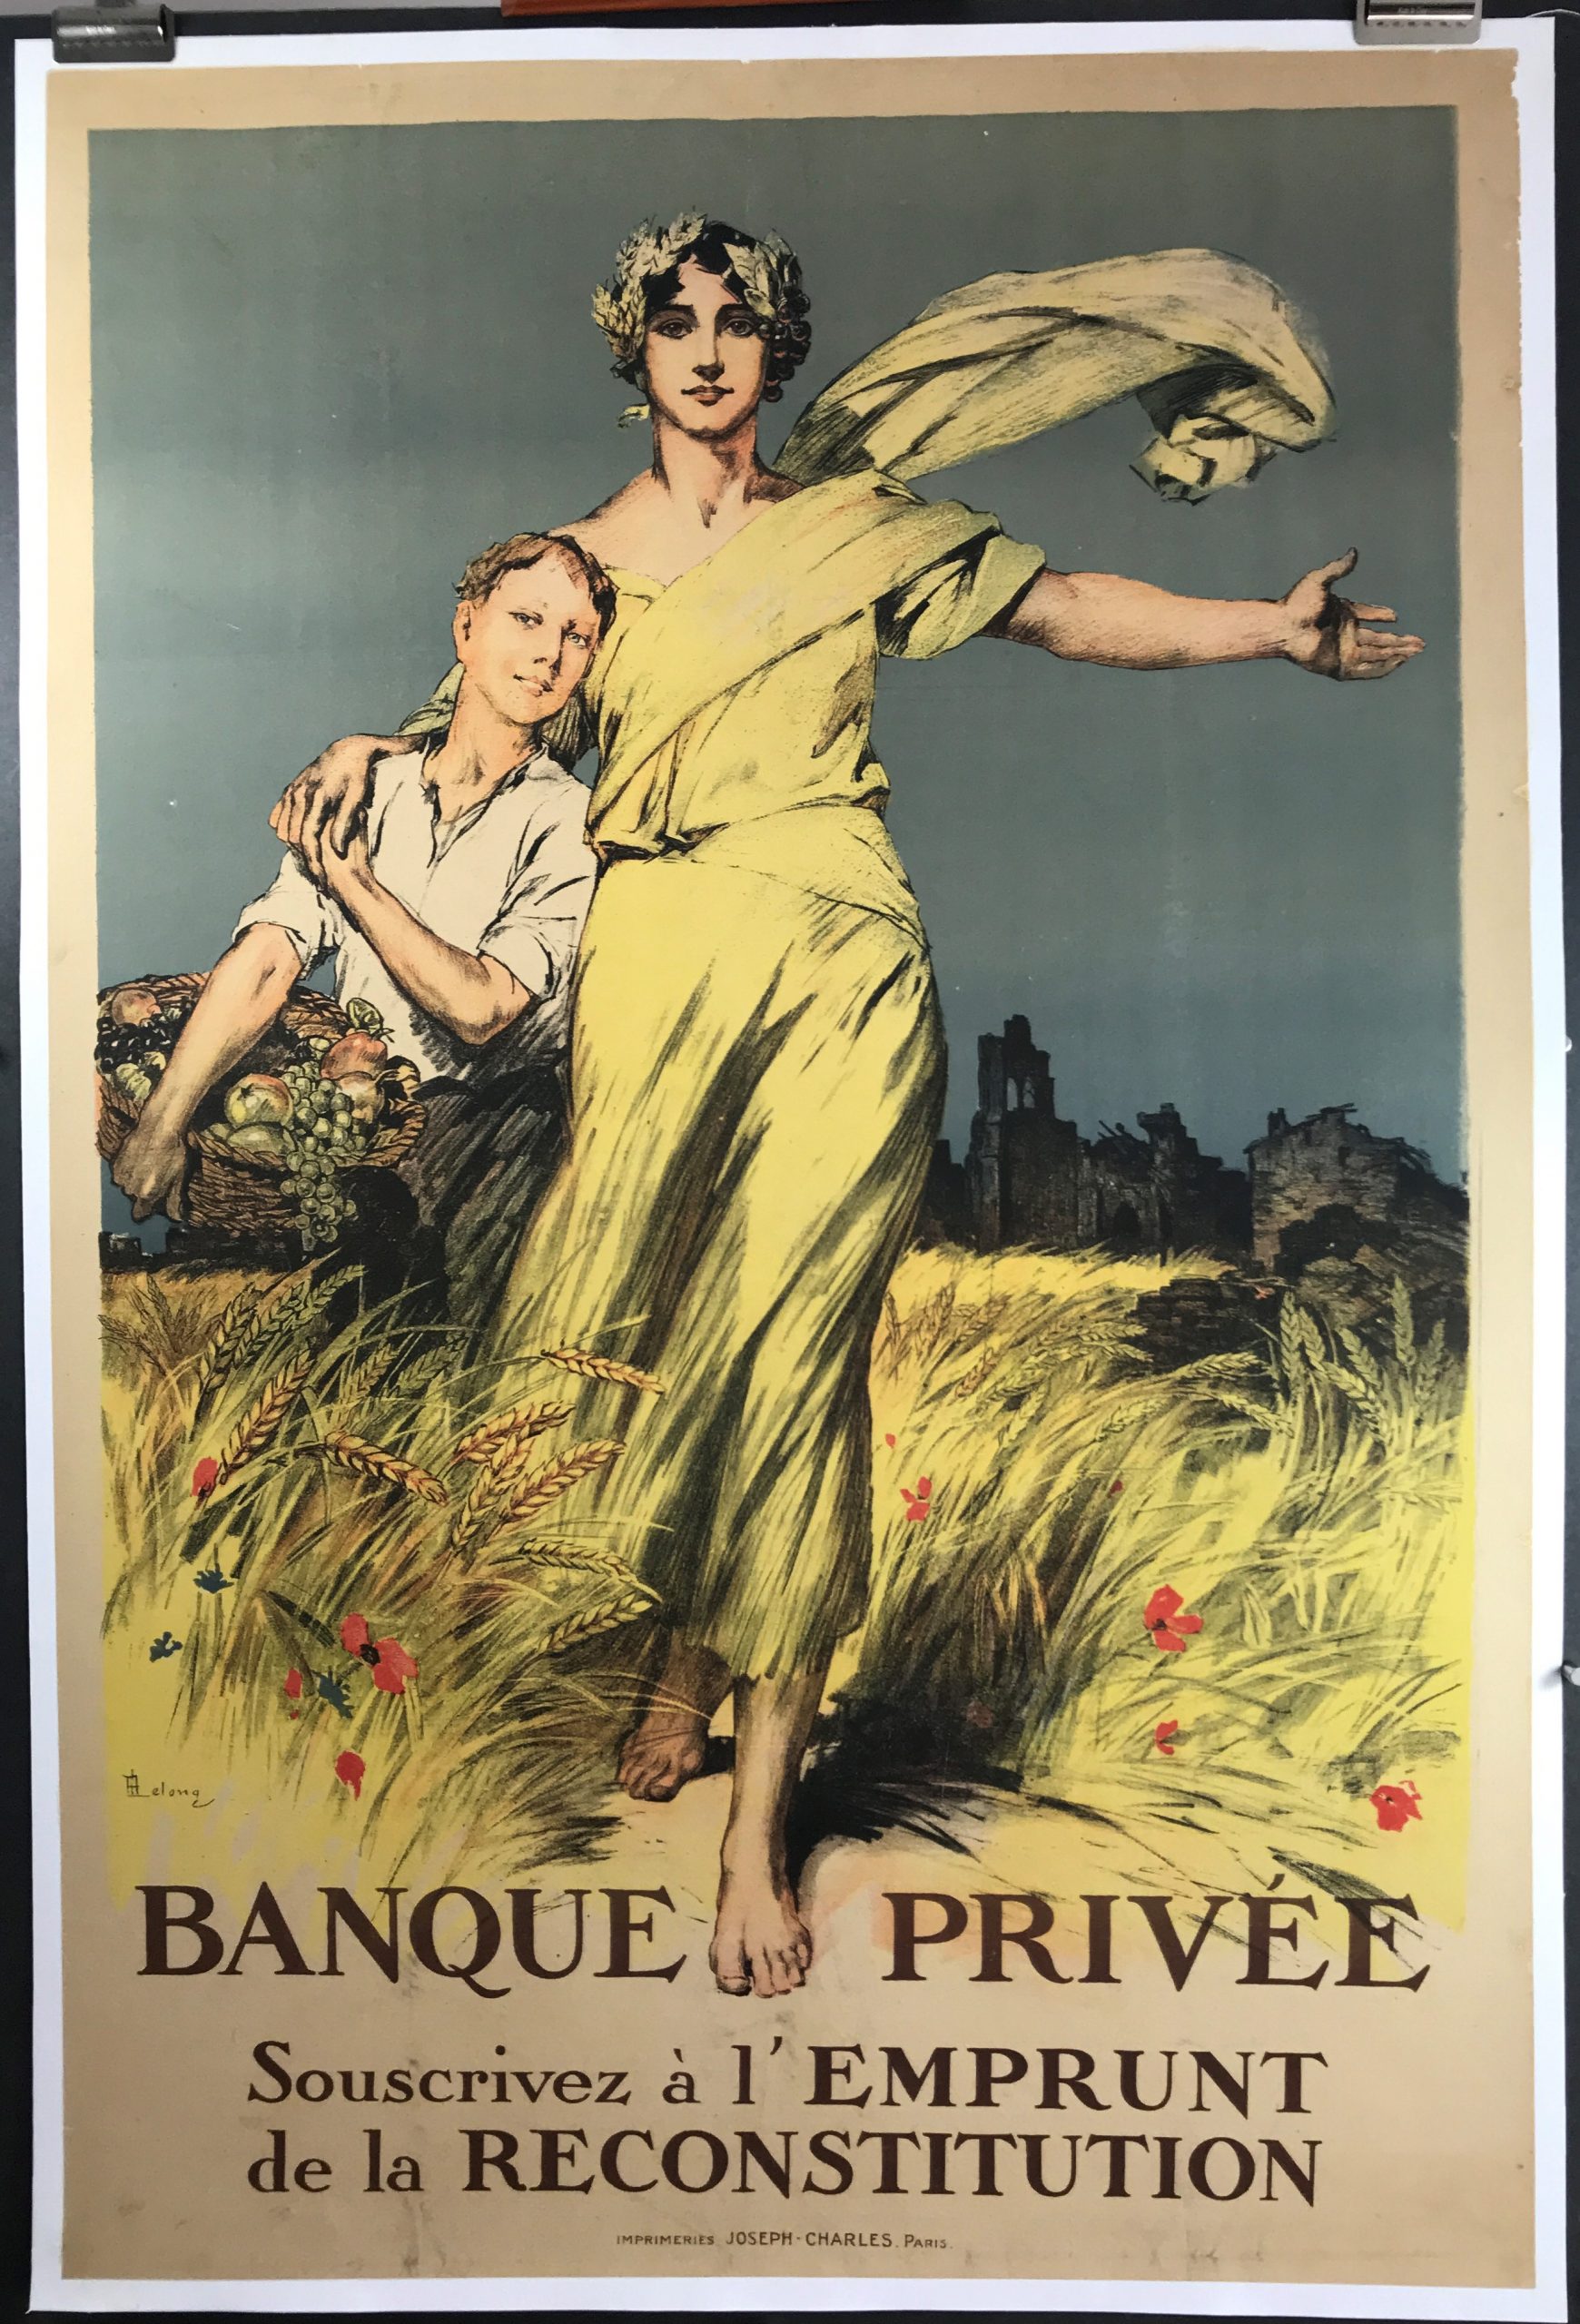 1920s poster